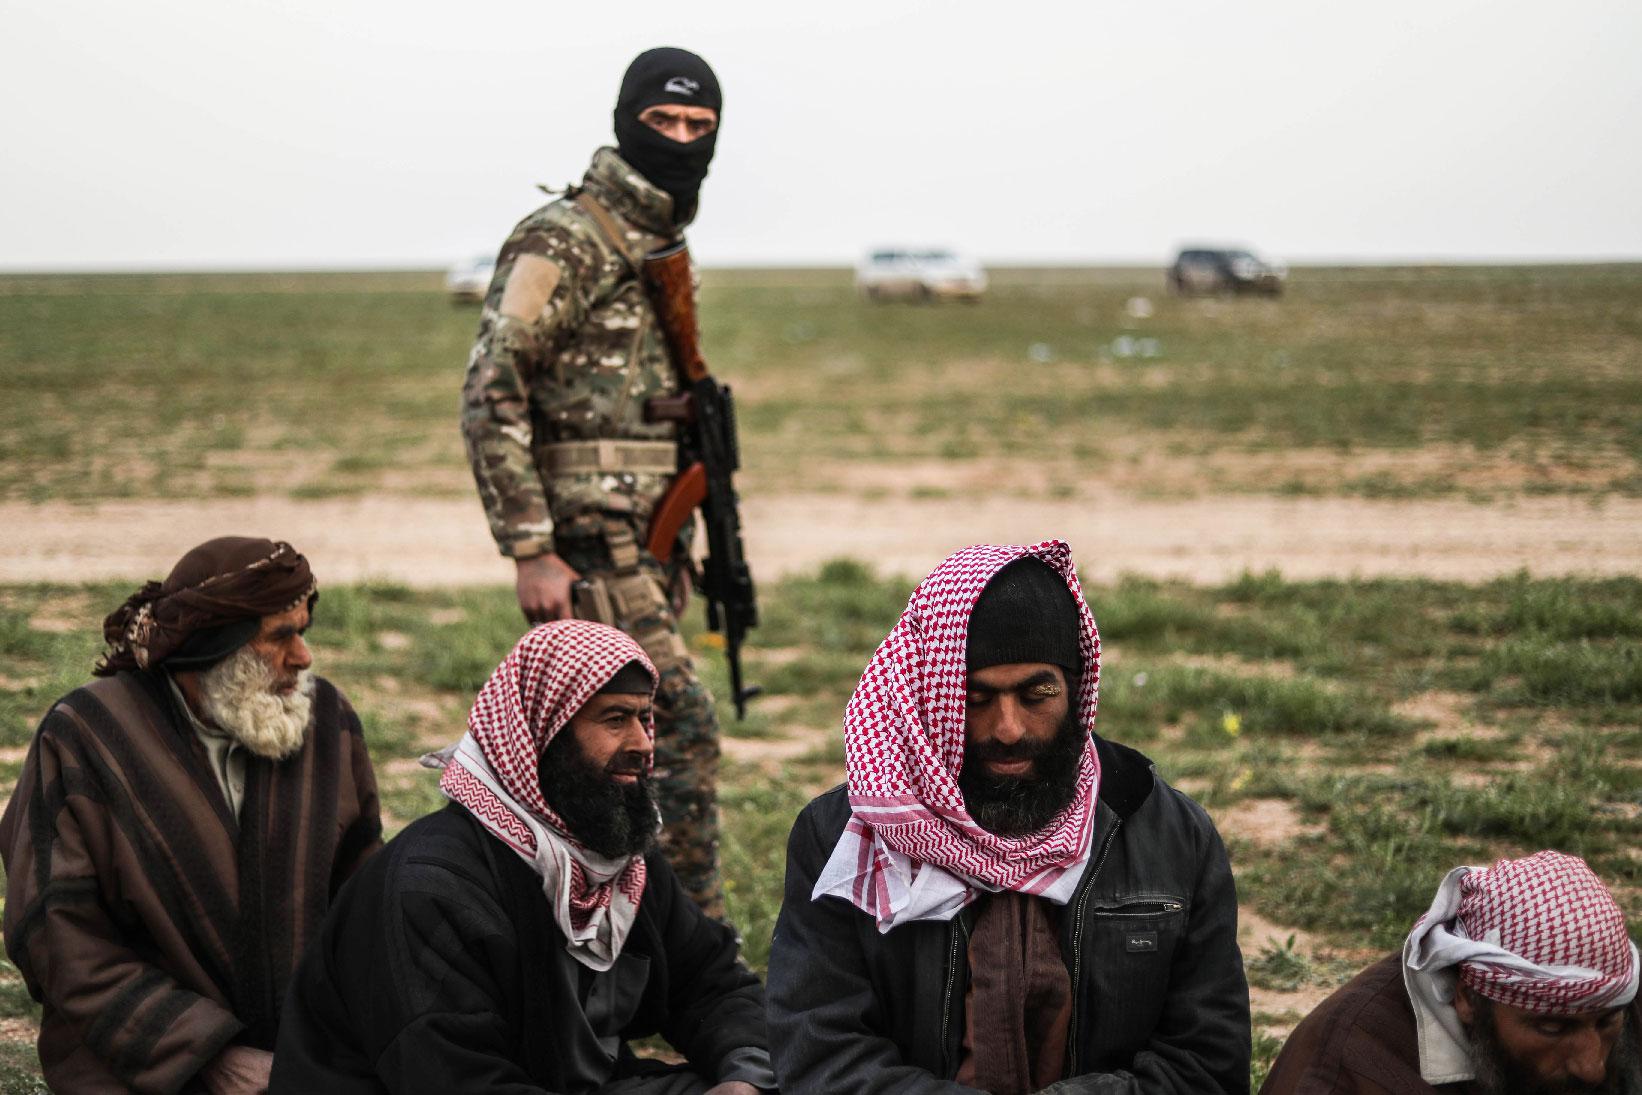 A fighter with the US-backed Syrian Democratic Forces (SDF) walks past men at a screening area for those who are evacuated from the Islamic State (IS) group's embattled holdout of Baghouz, during an operation to expel IS jihadists from the area, in the eastern Syrian province of Deir Ezzor, on February 26, 2019.